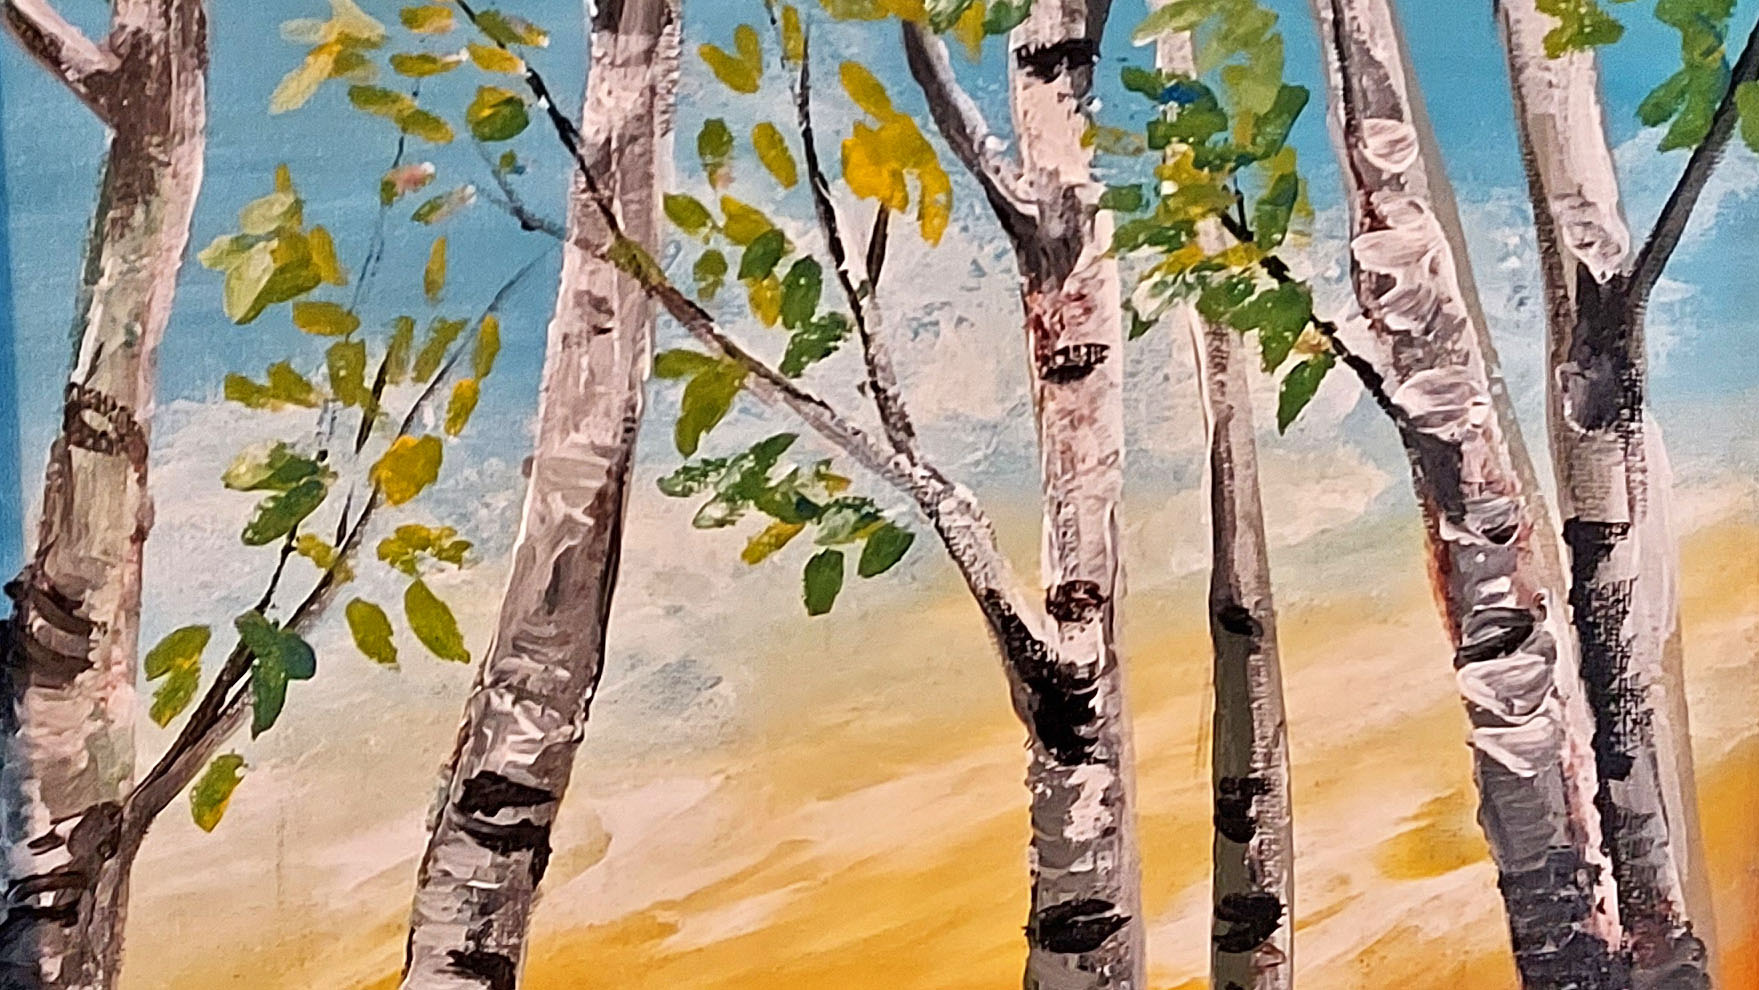 Cropped portion of an acrylic landscape painting by local artist Beth White showing trees as the light changes